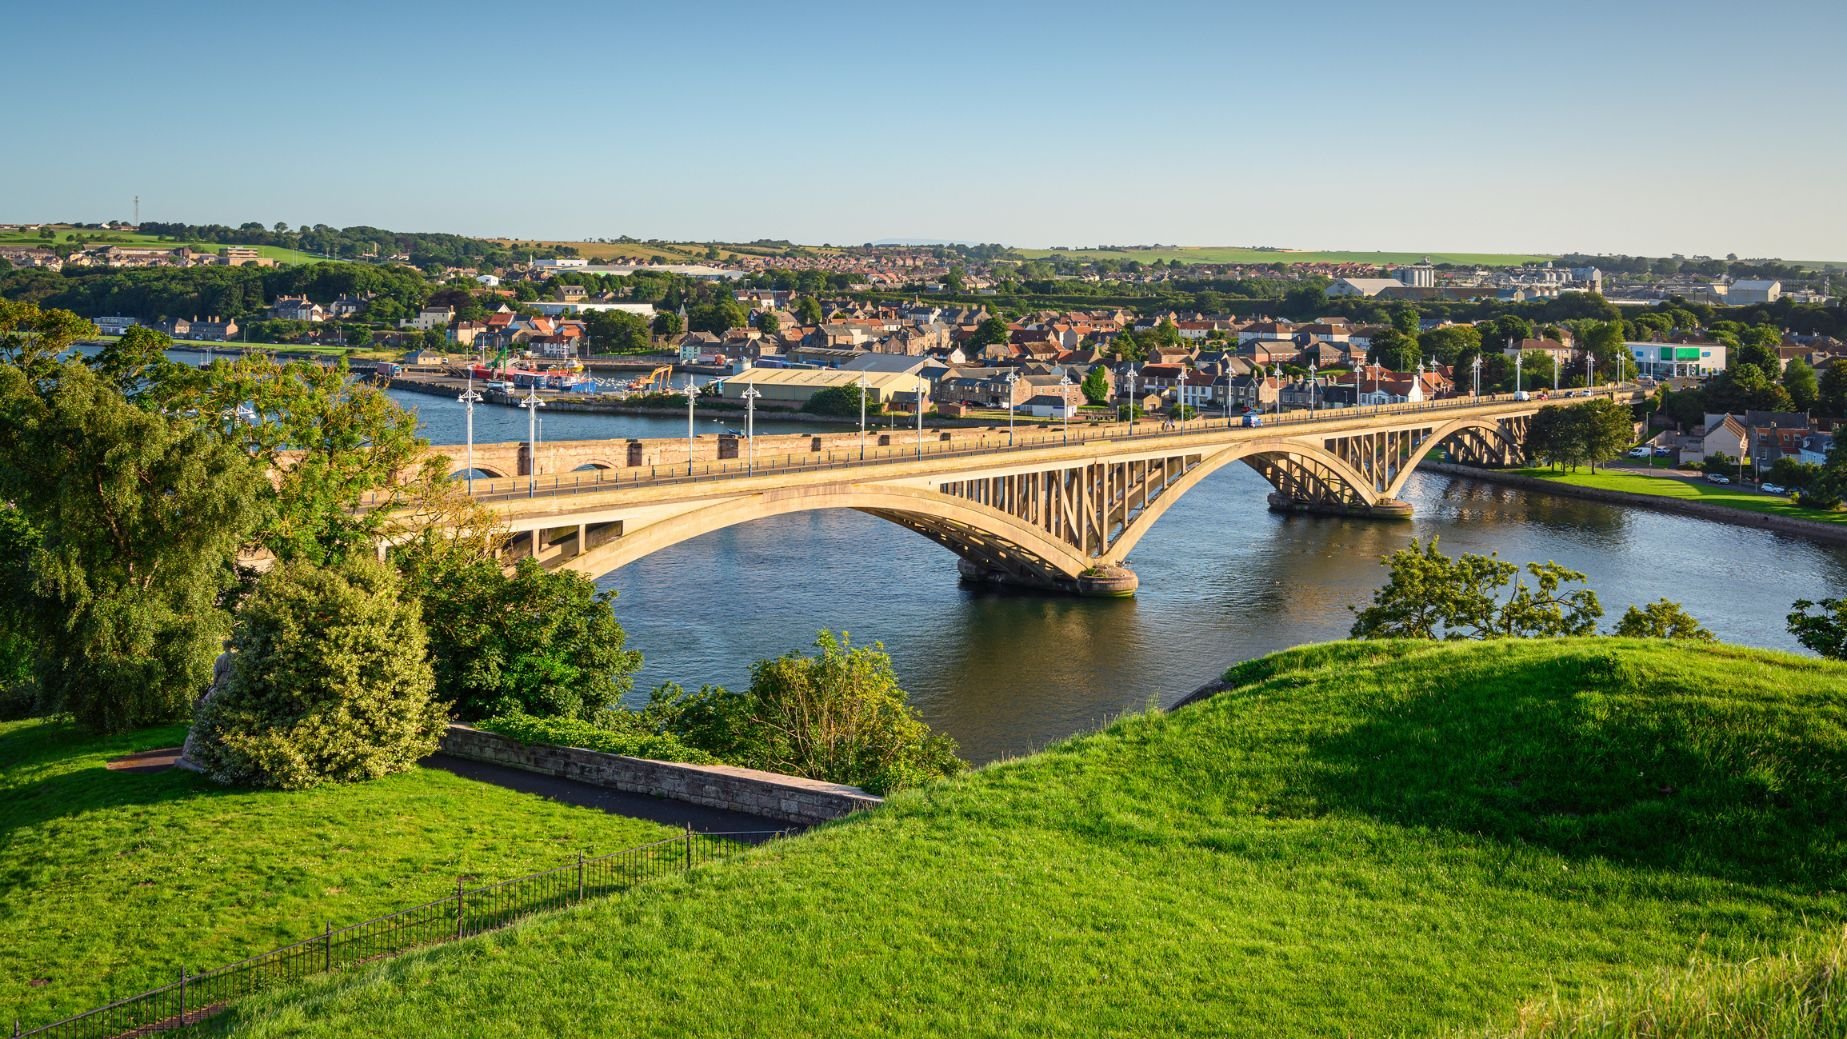 Berwick-upon-Tweed is the most northerly town in England, located at the mouth of the River Tweed just below the Scottish border. Photo: Getty